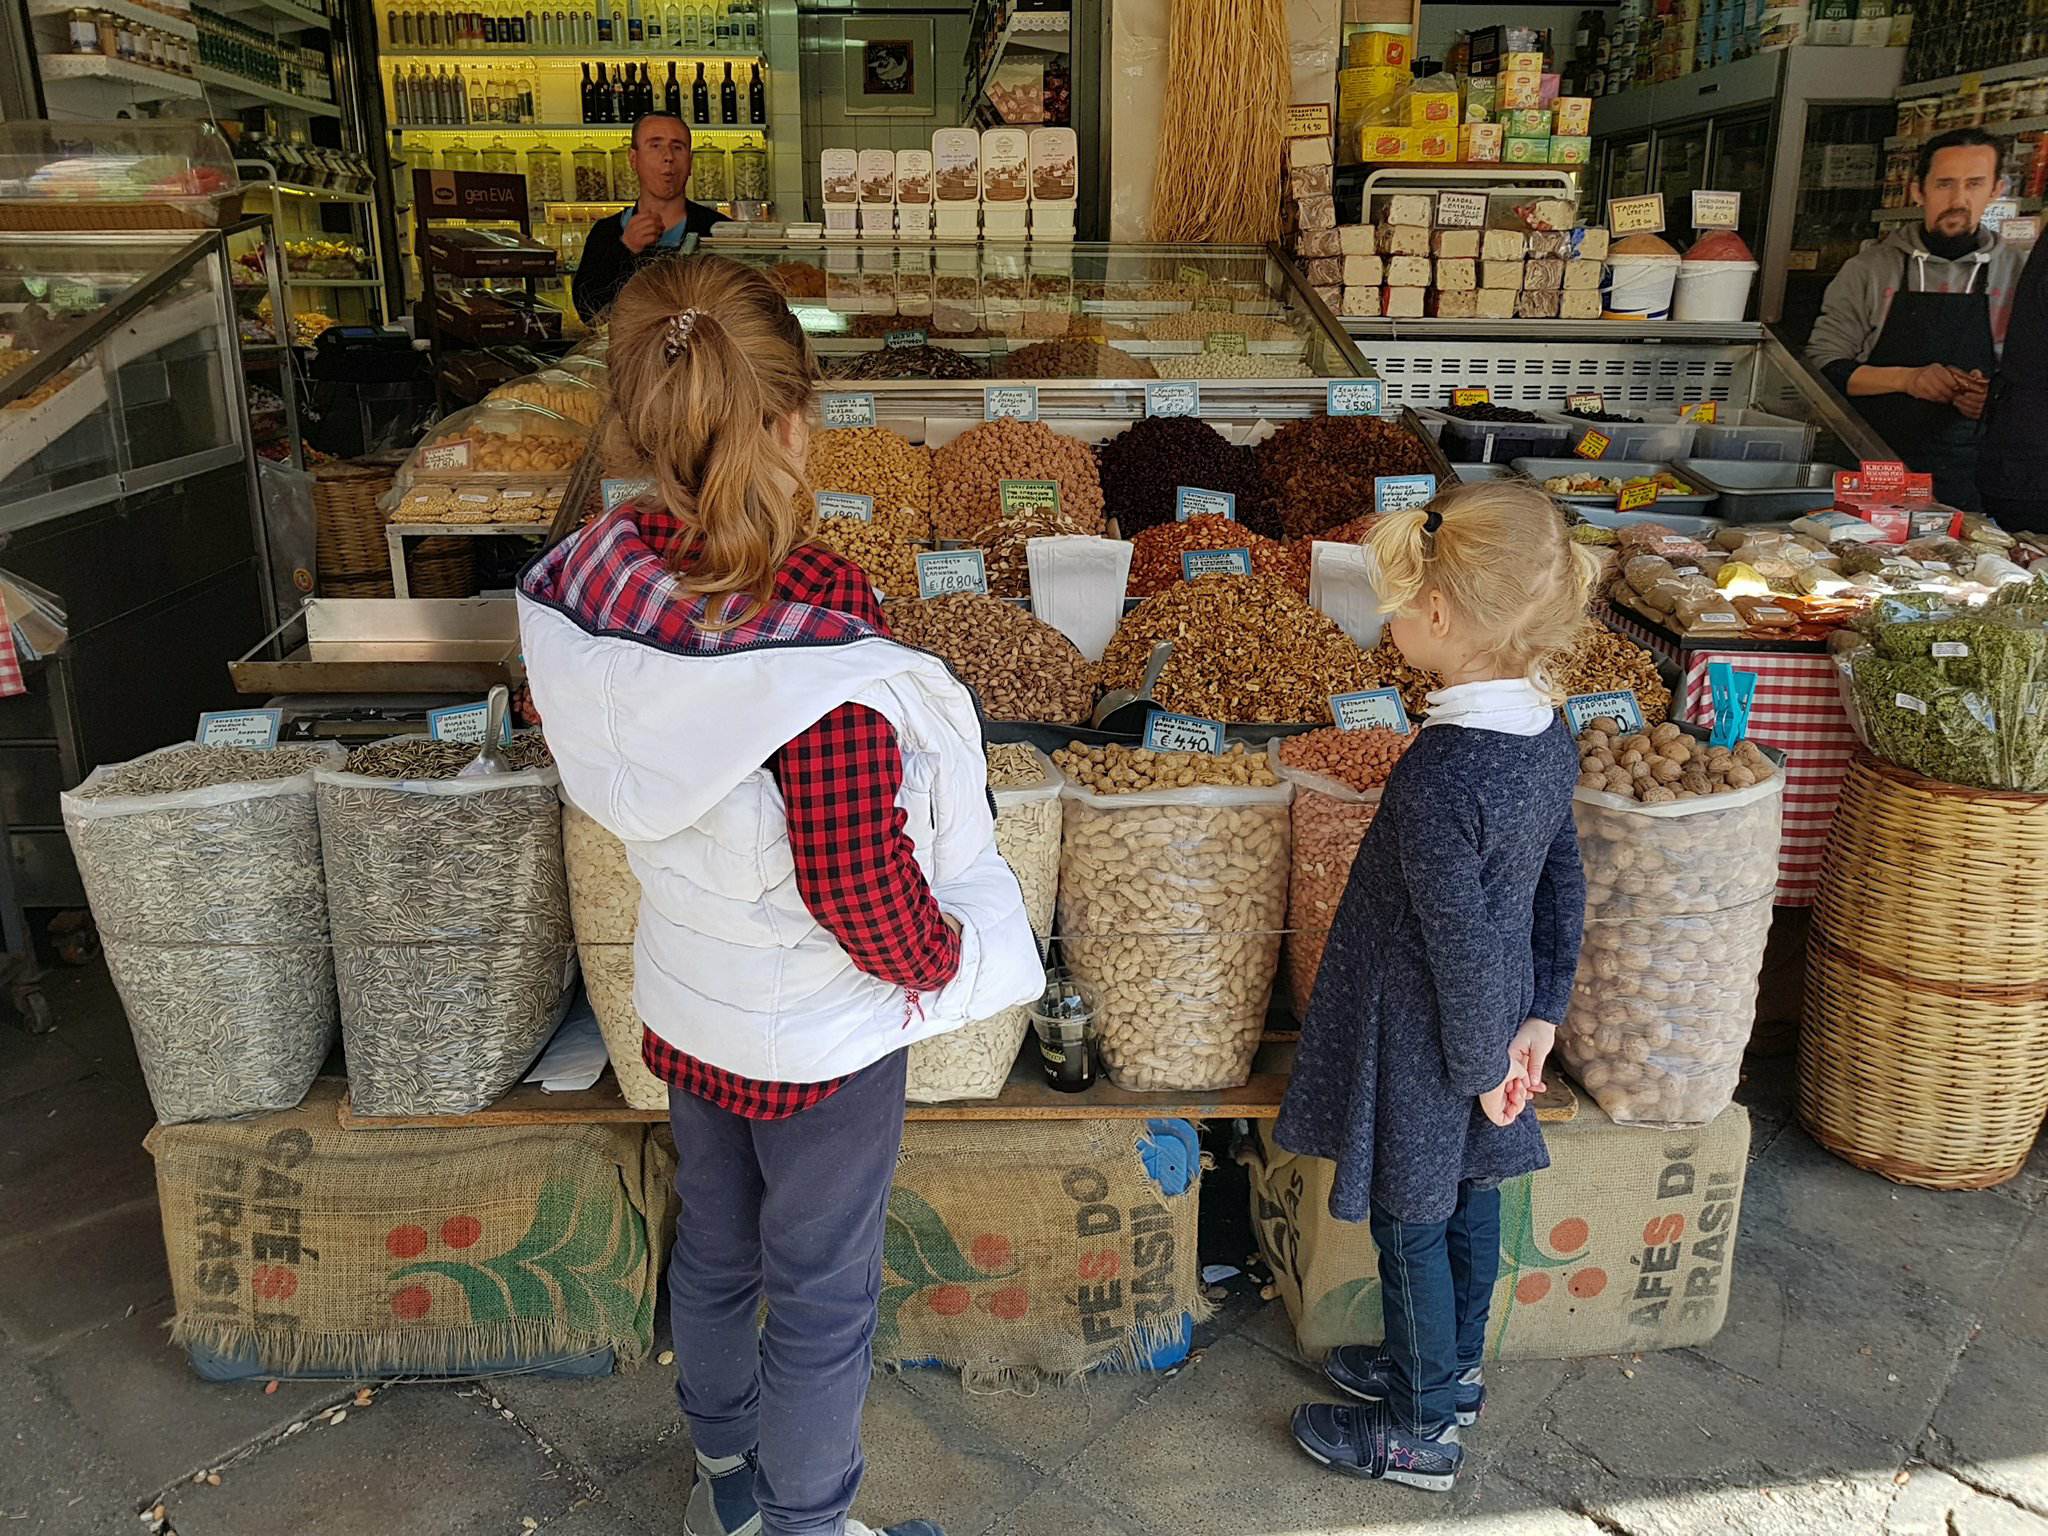 Athens with children